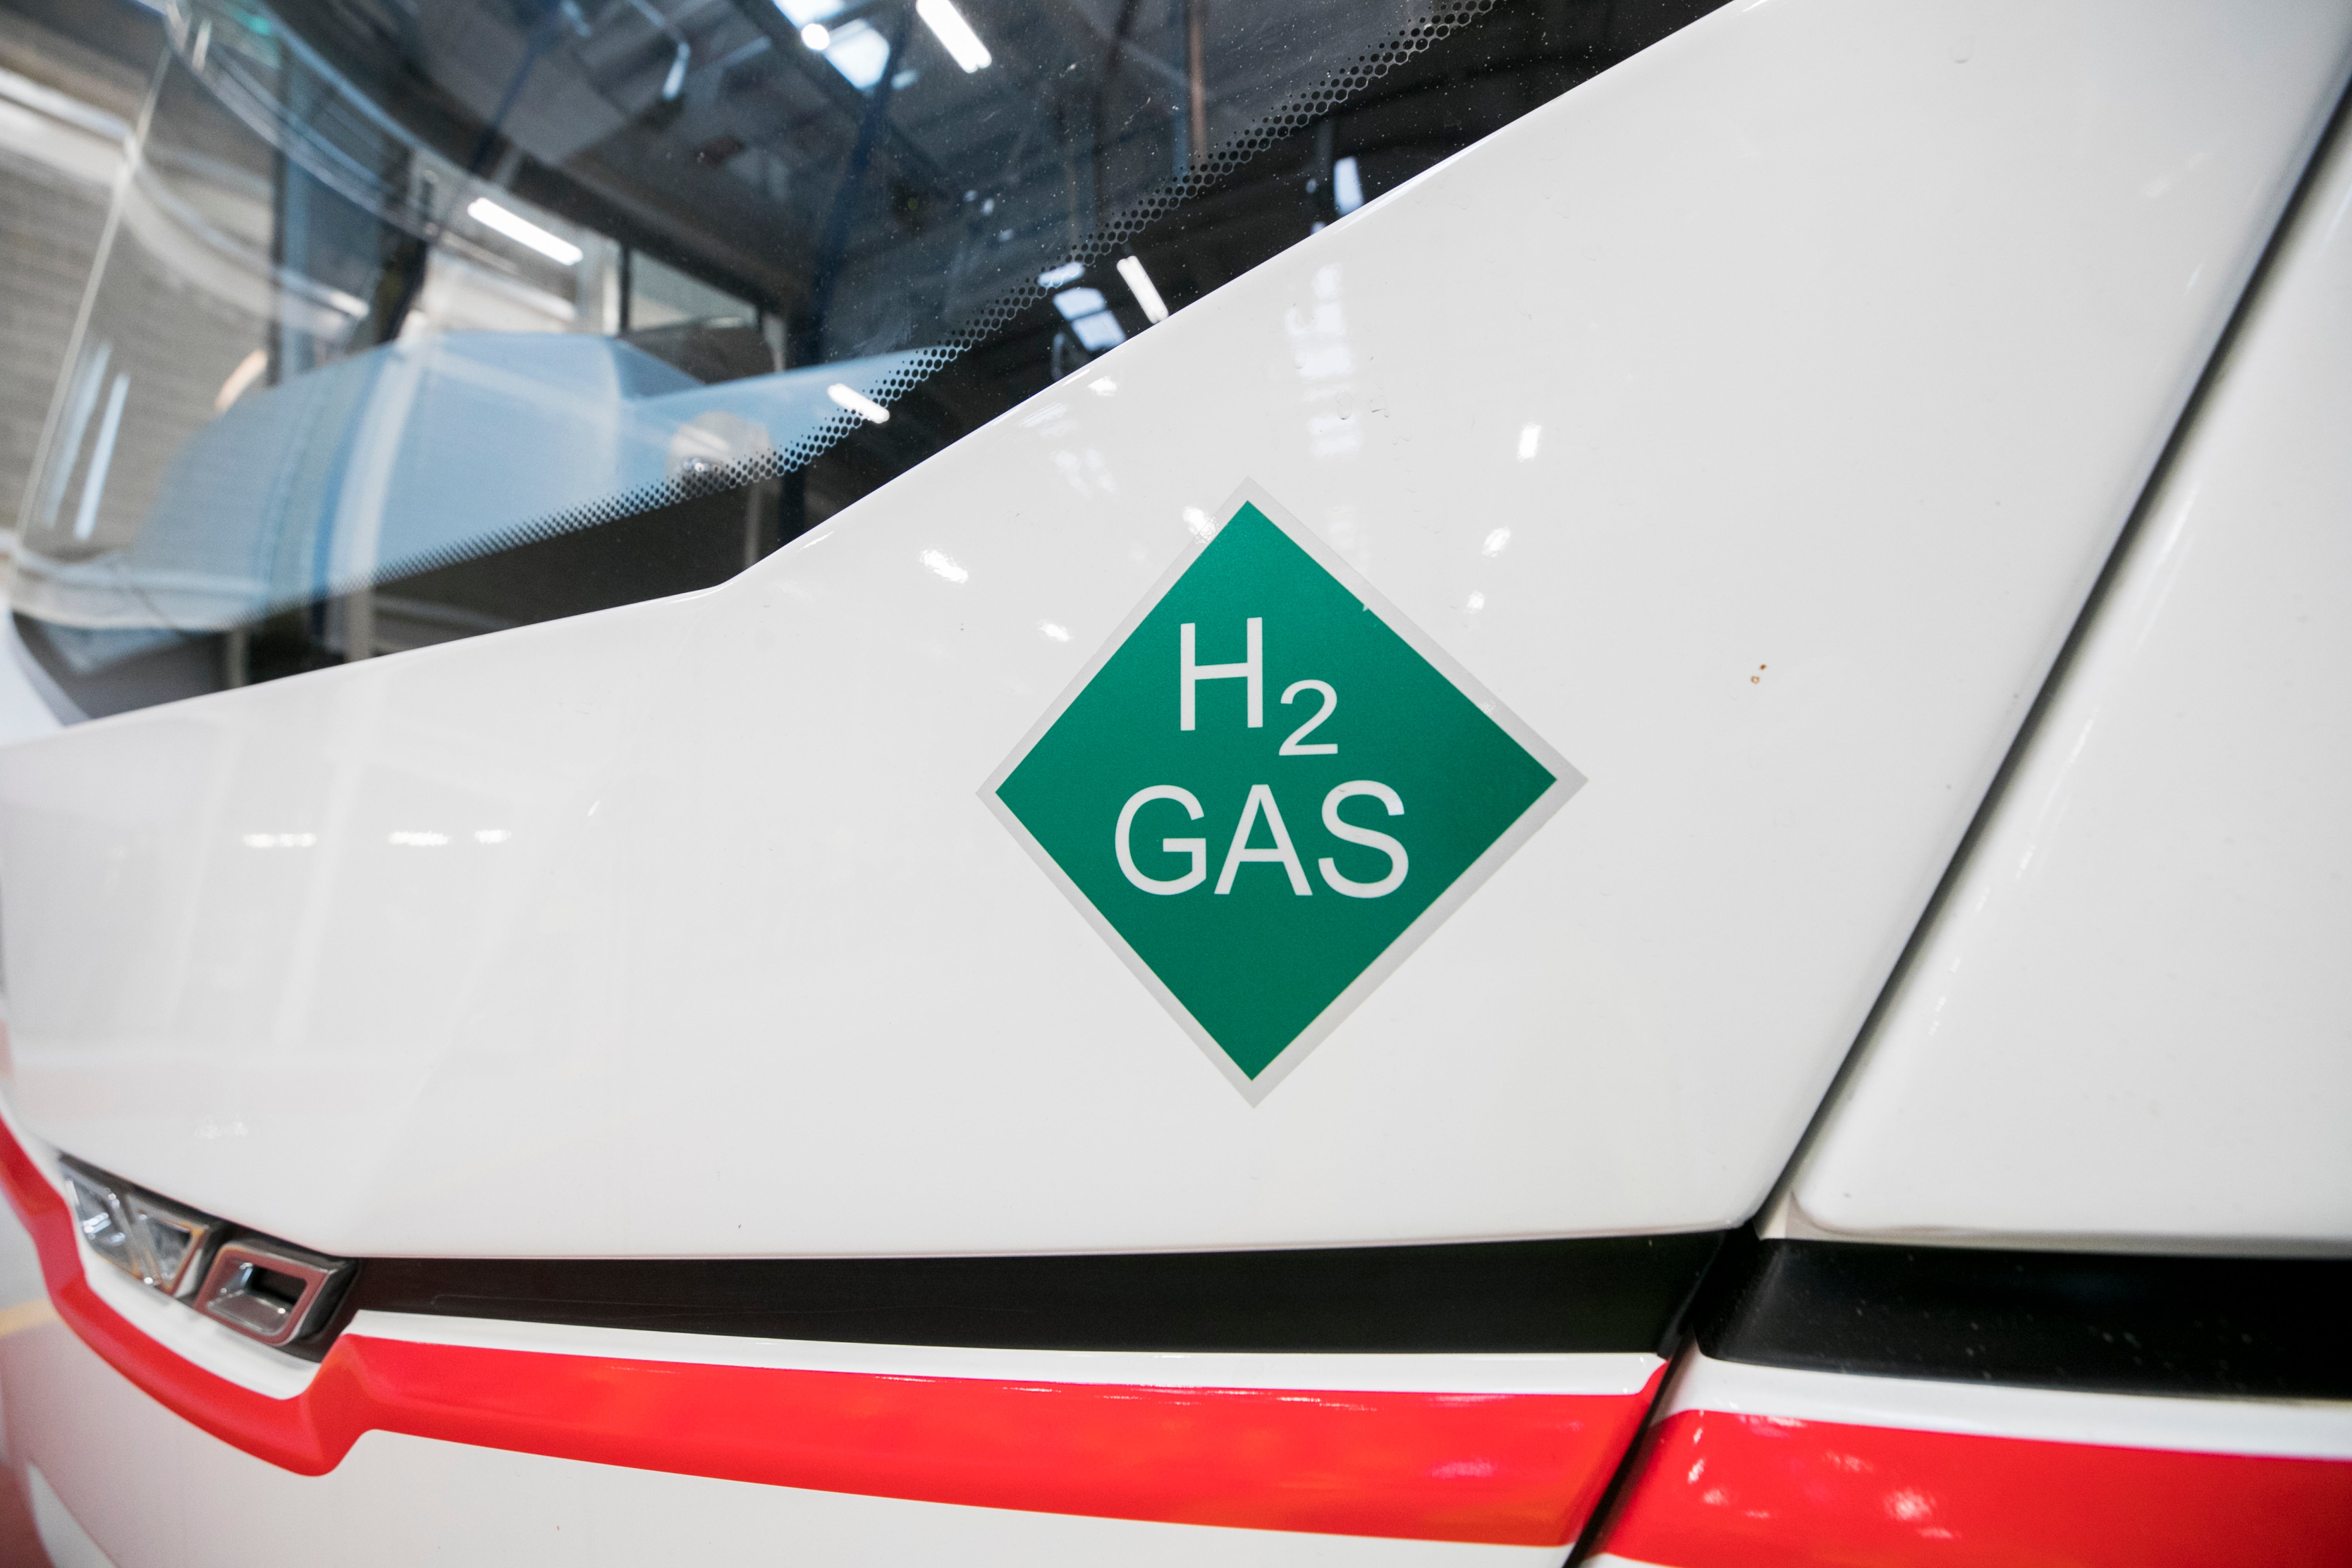 Hydrogen is being mooted as a possible fuel for heavy transport in the future (Liam McBurney/PA)